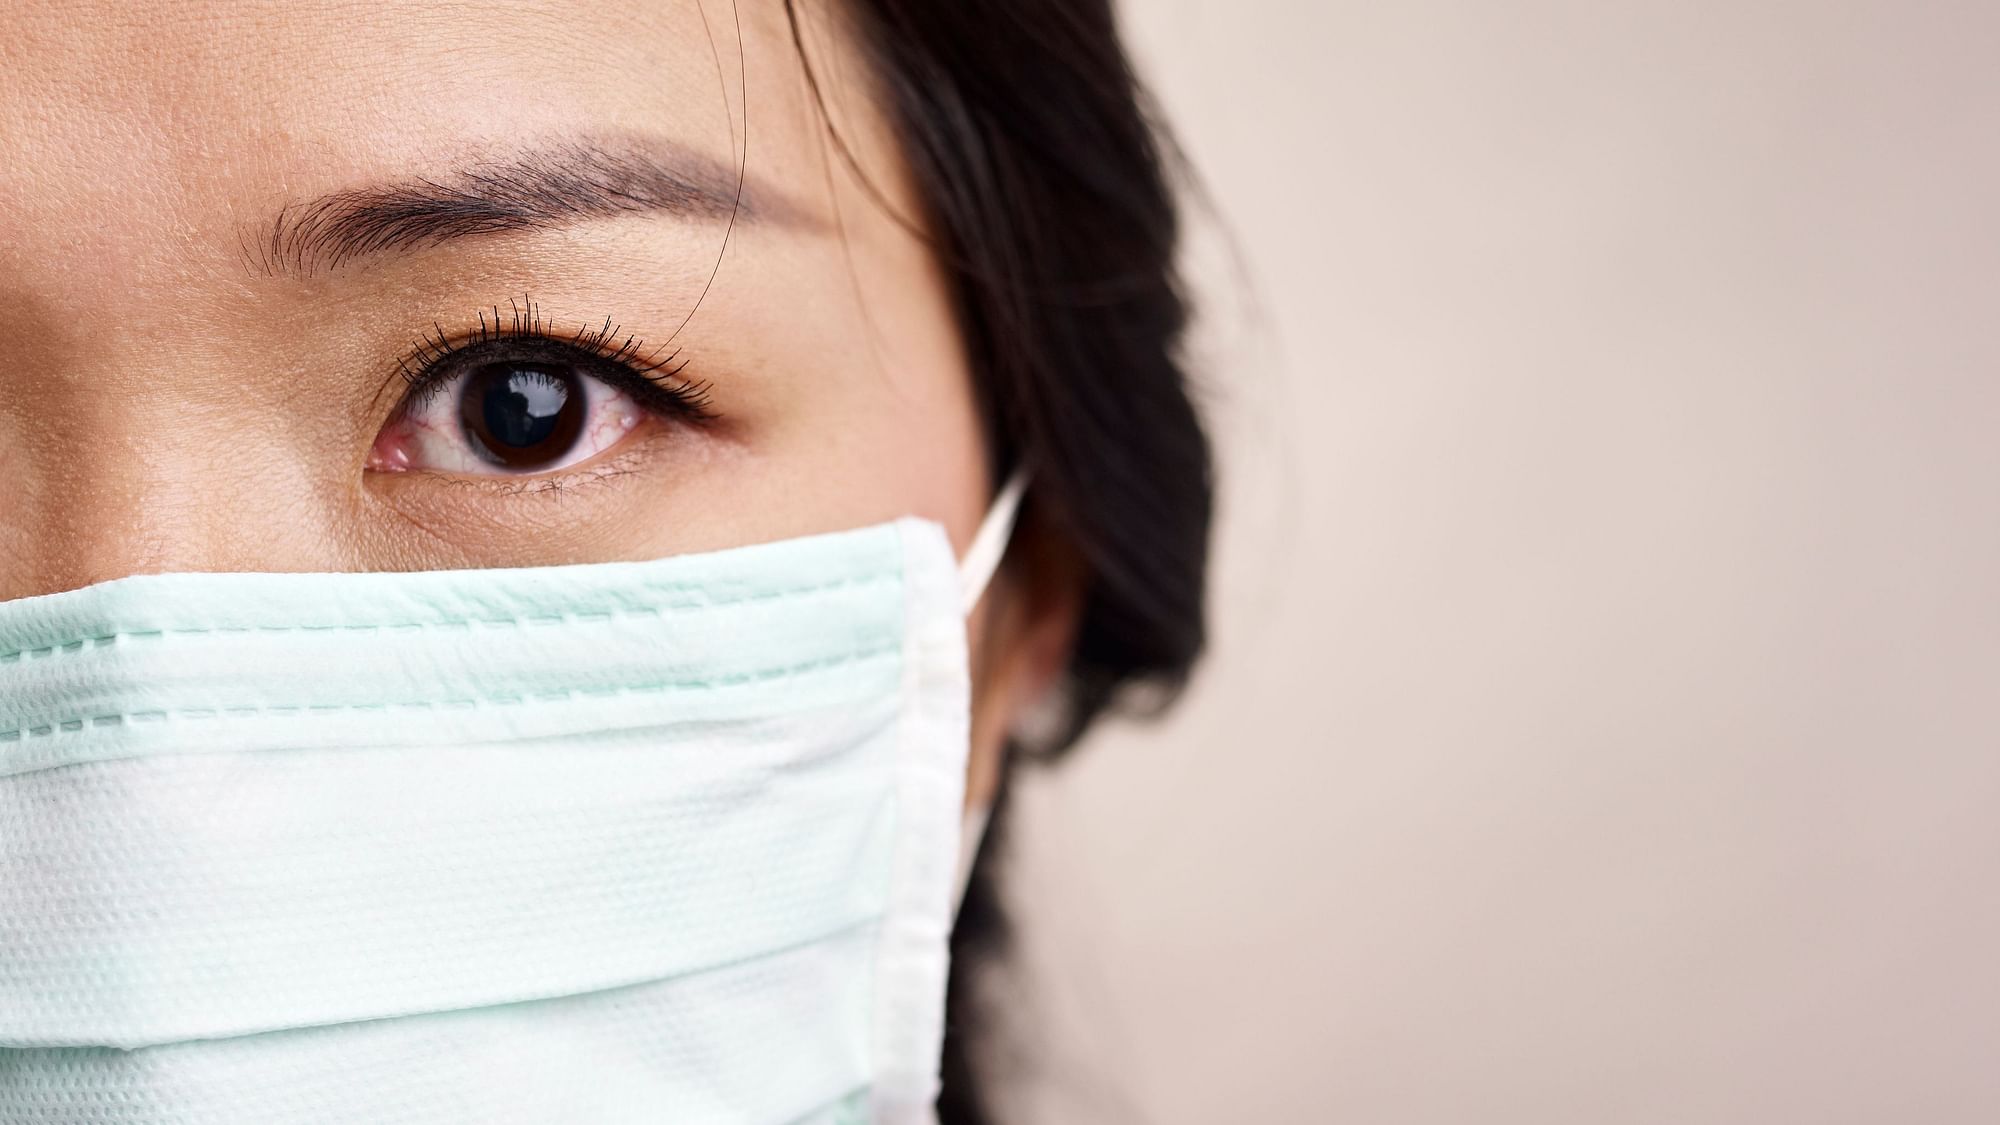 Exposure to air pollution could also increase risk of glaucoma.